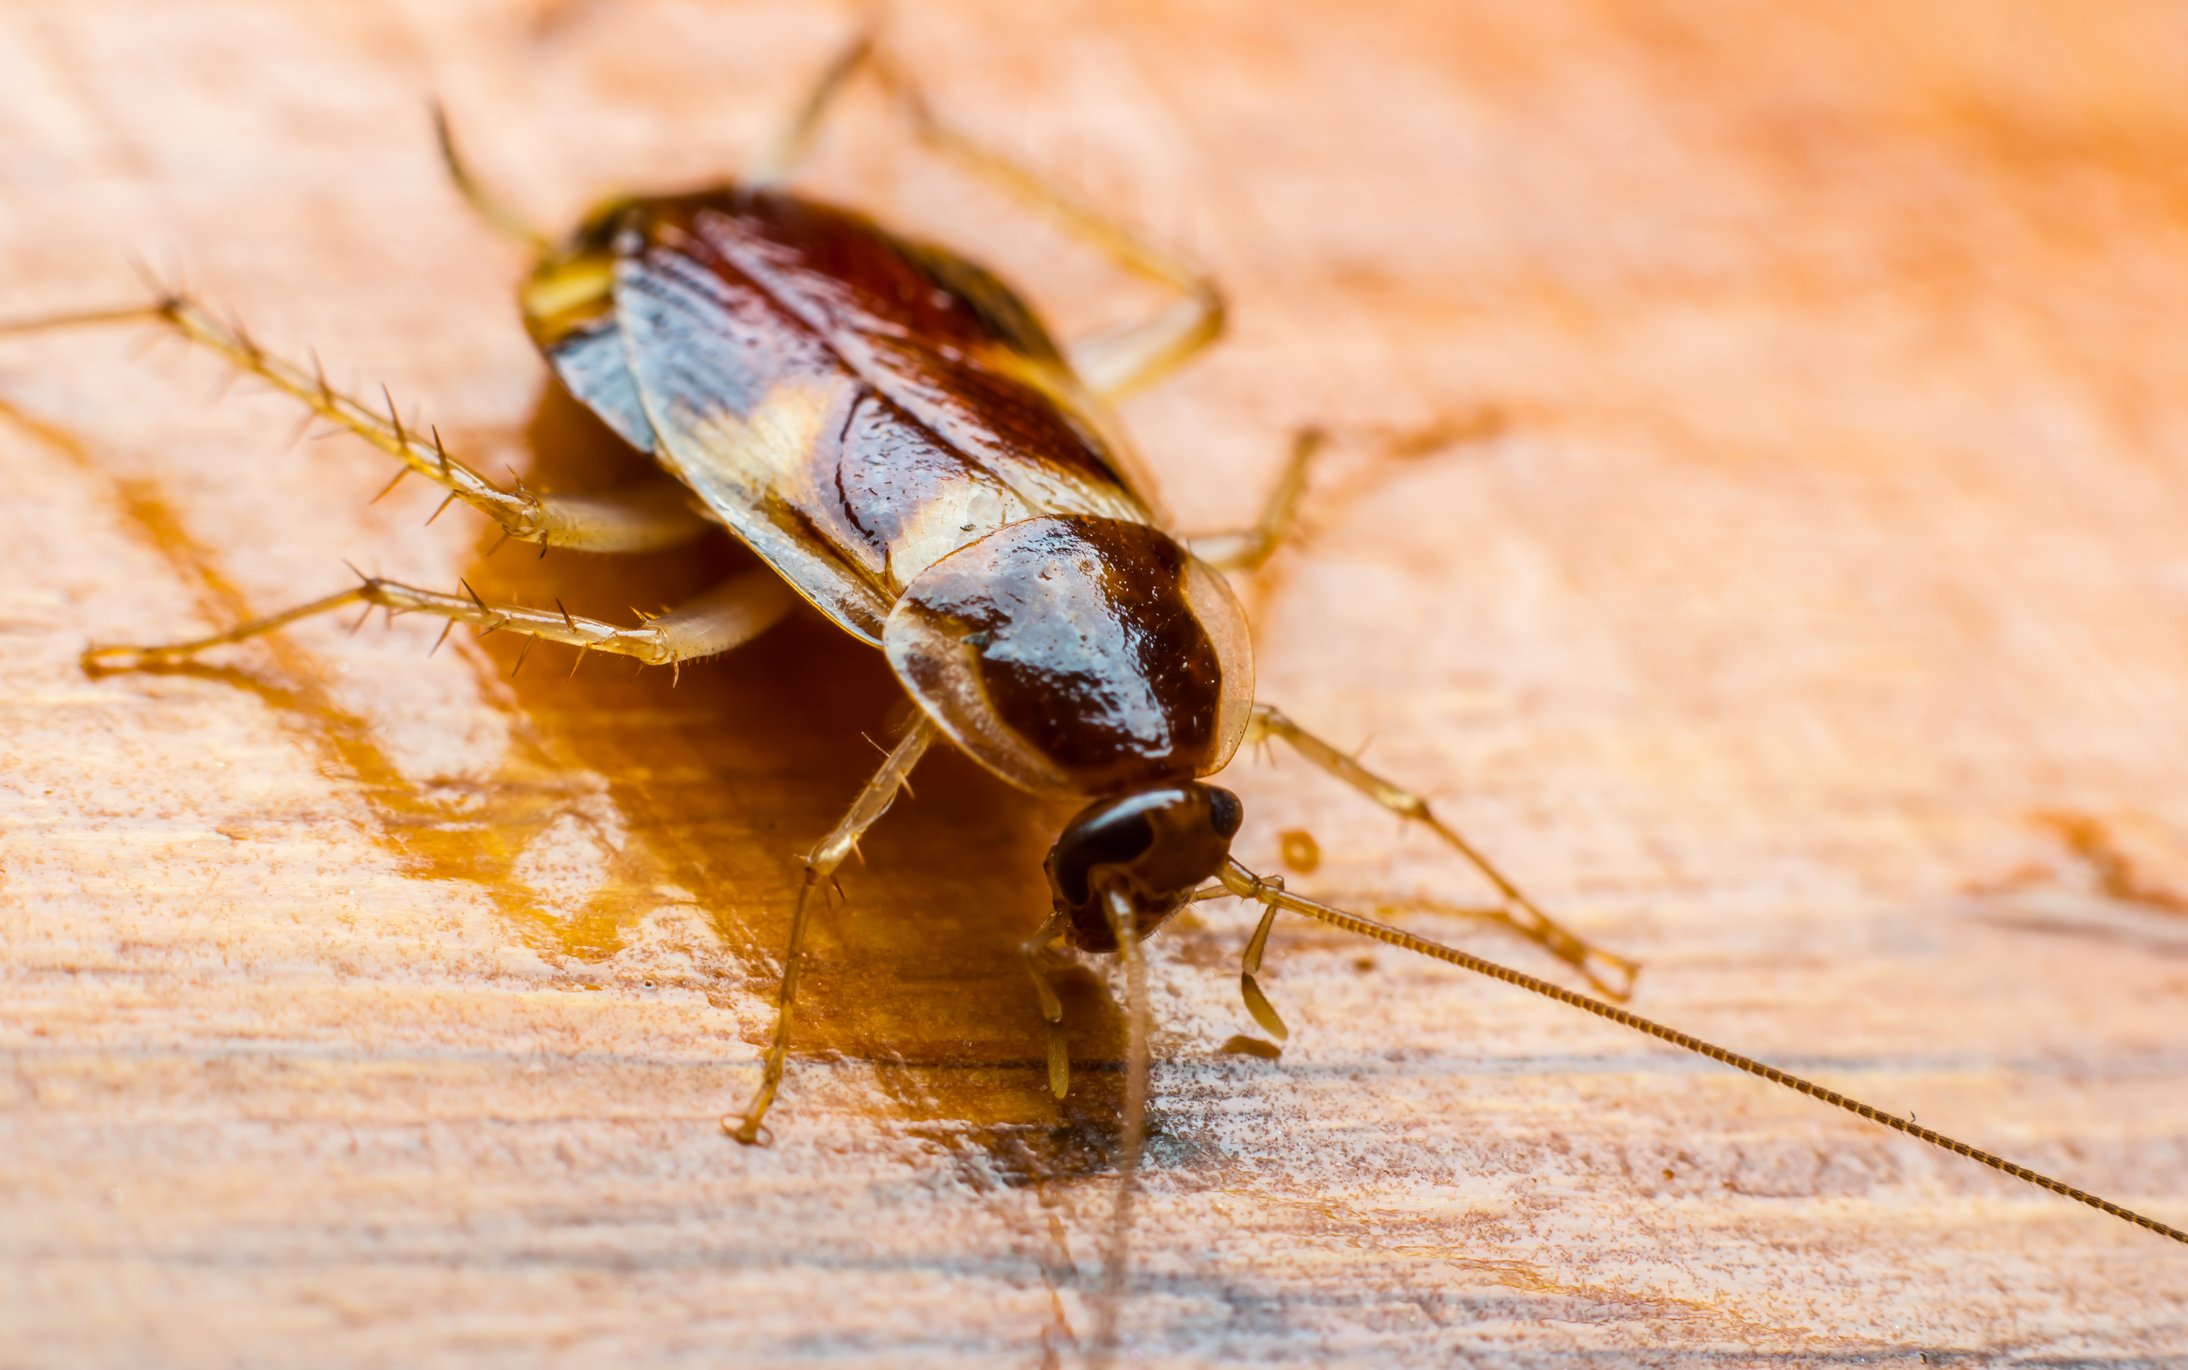 10 Cockroach Facts Myths And Misconceptions Explained 